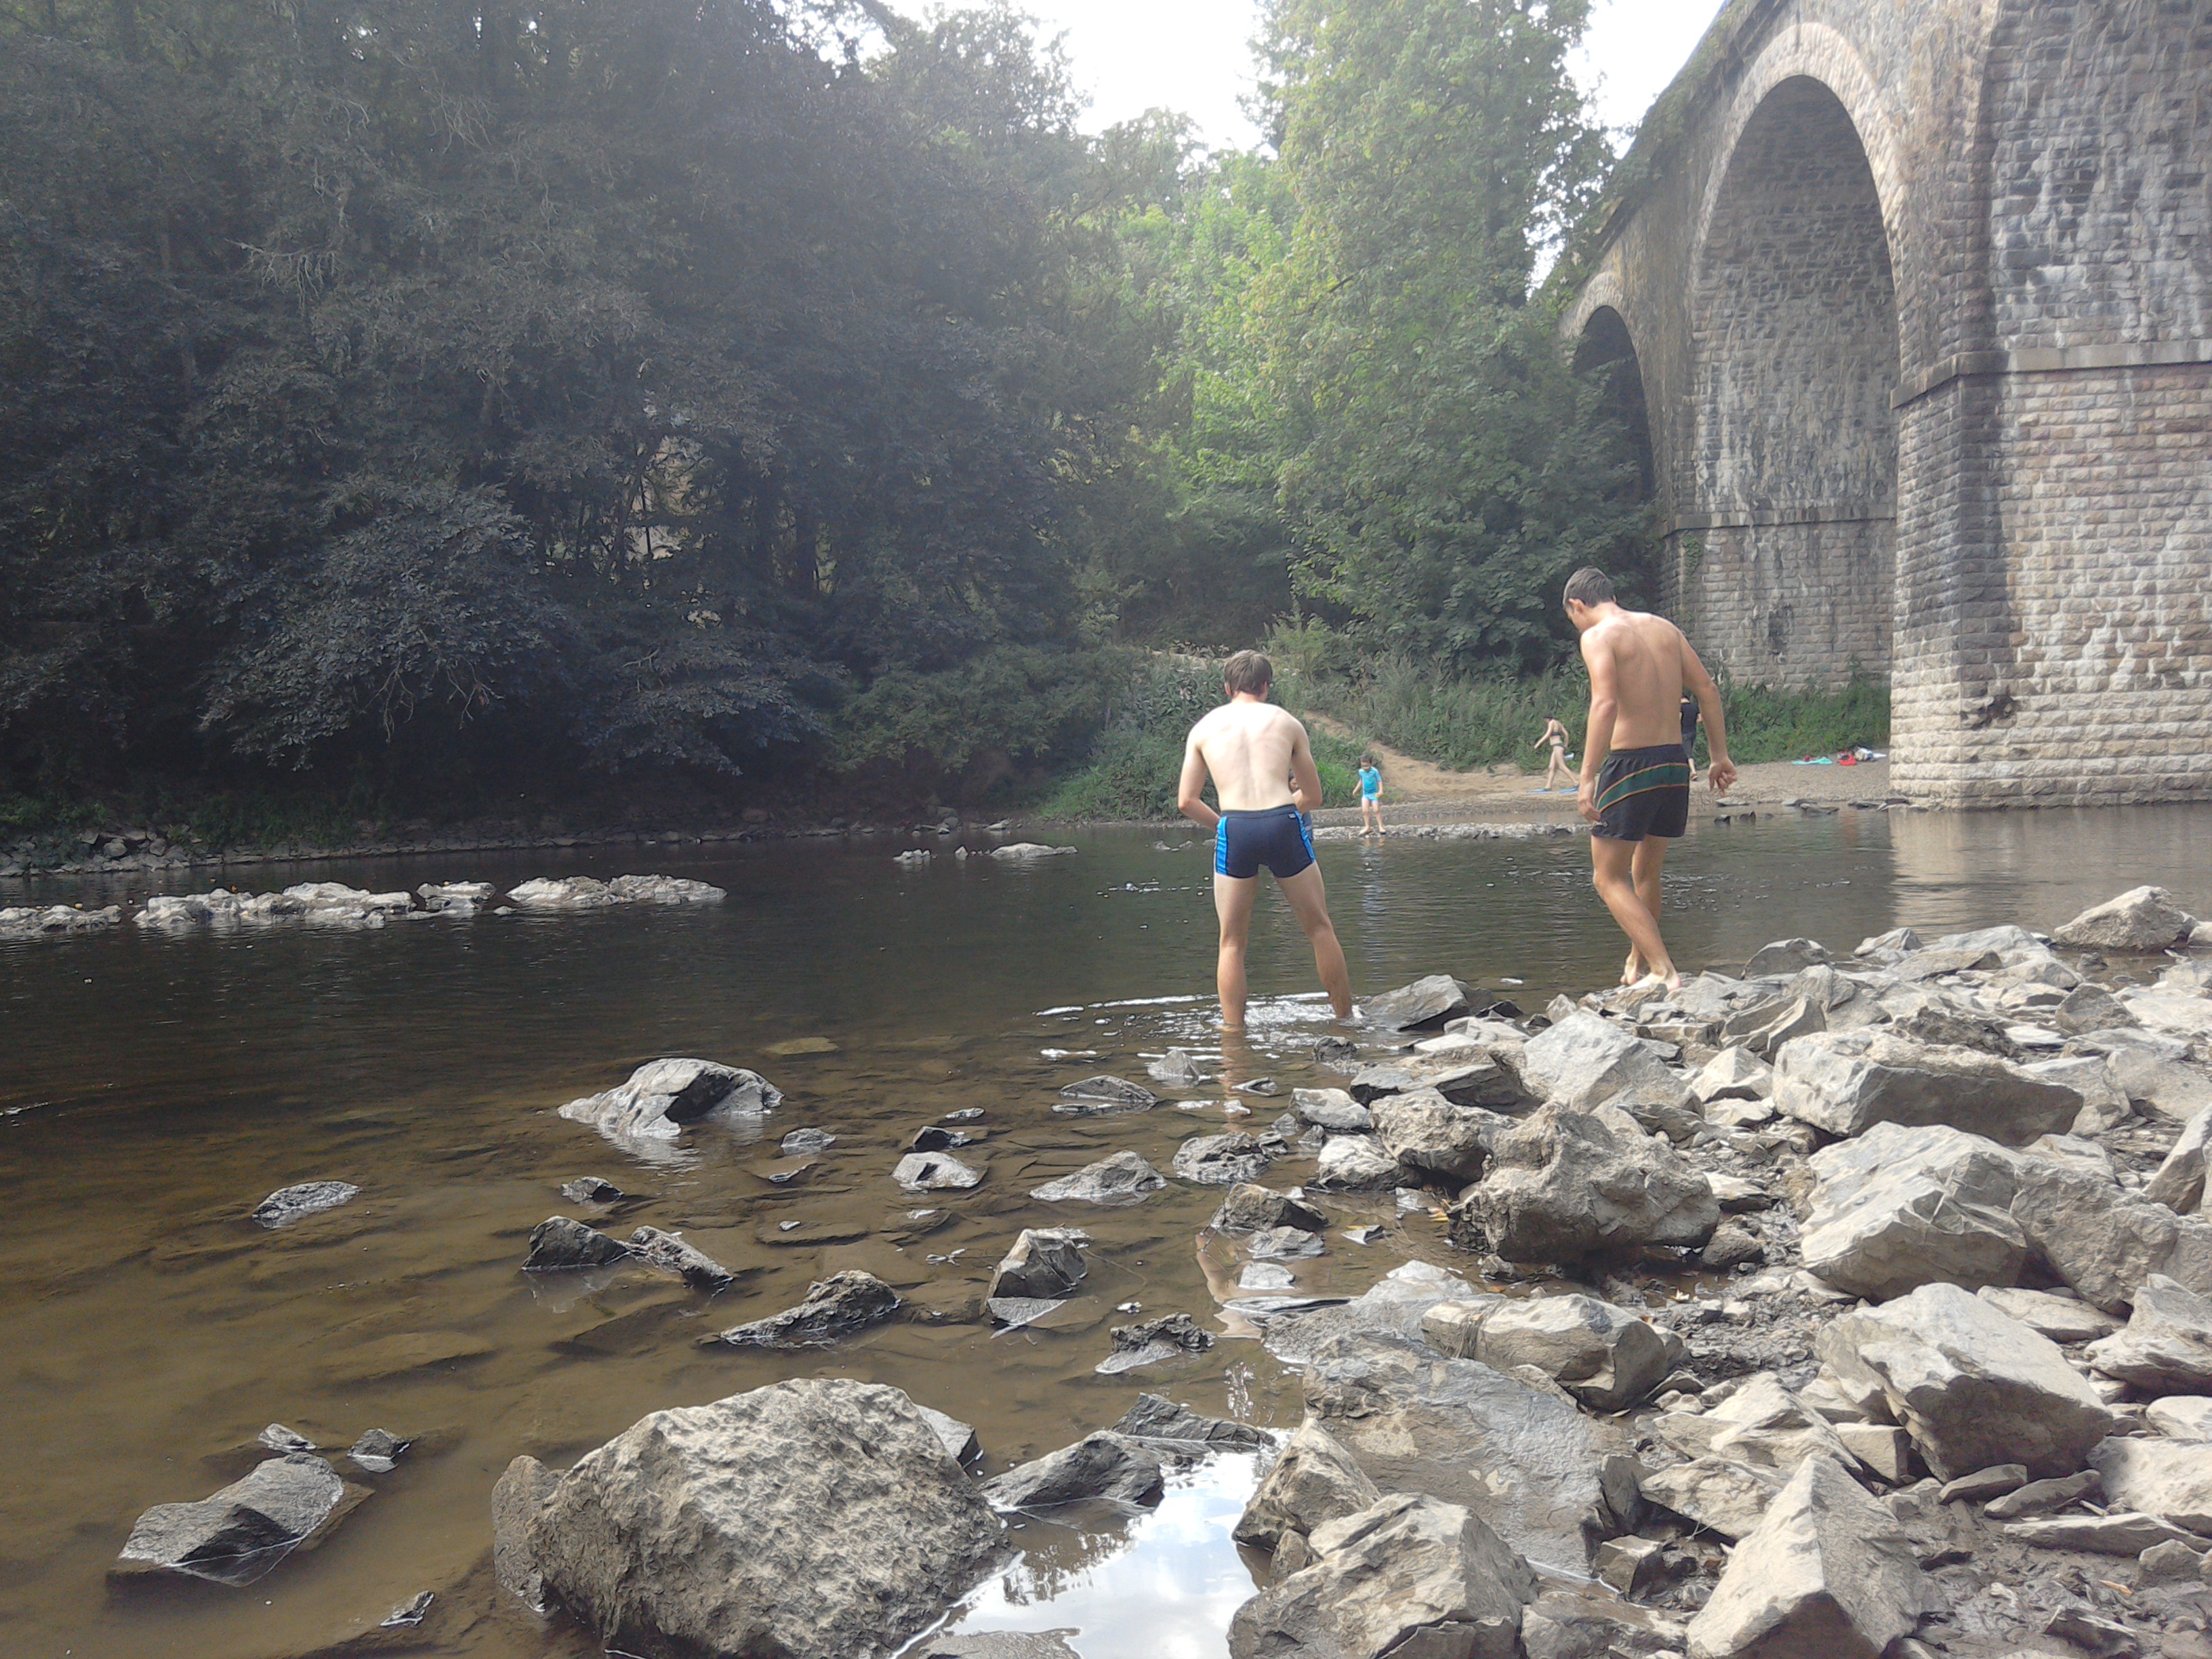 River swimming on the Orne, Normandy, France